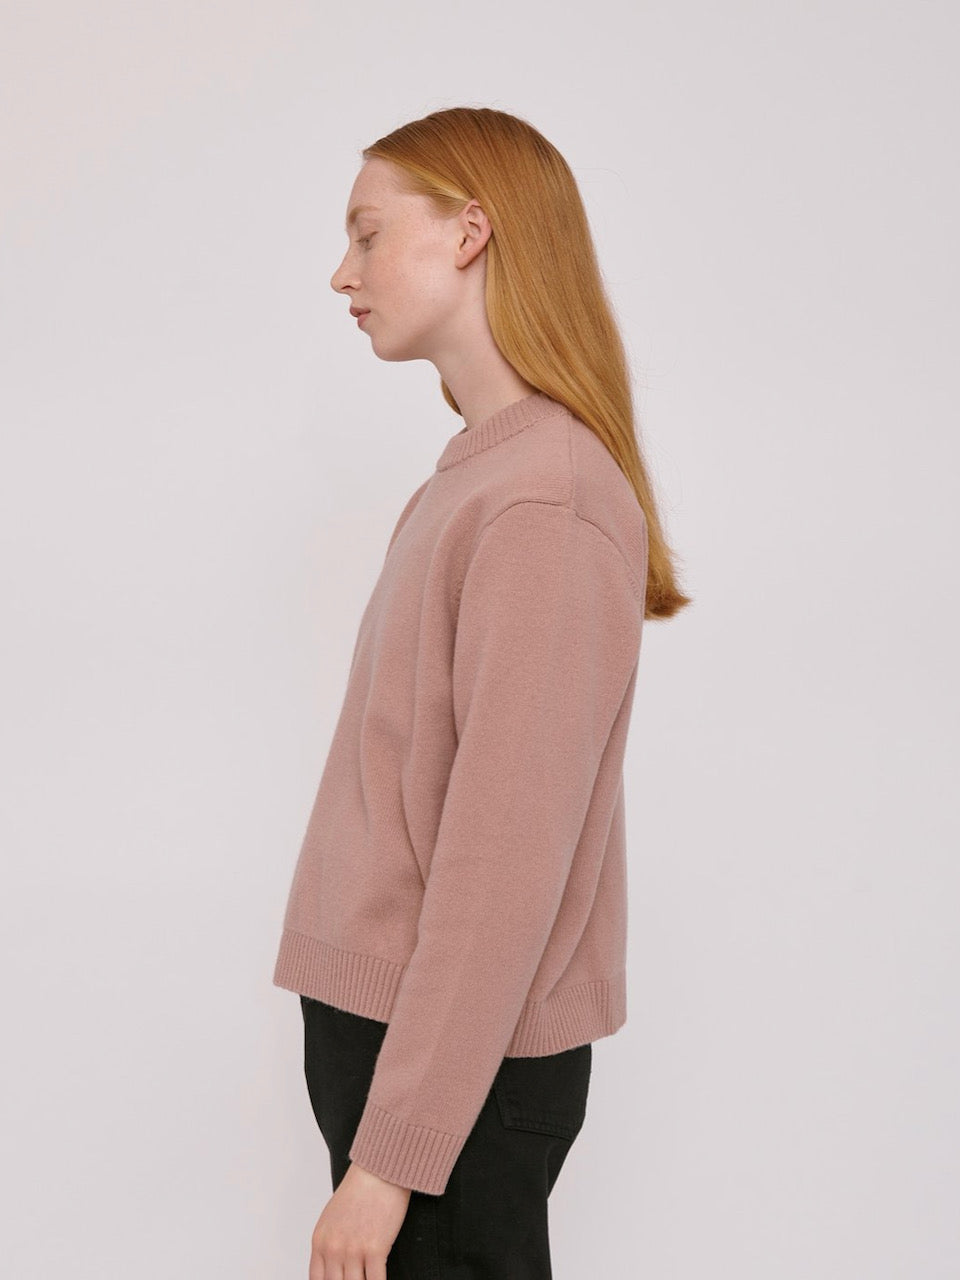 The model is wearing a Recycled Wool Boxy Knit Jumper - Dusty Rose by Organic Basics and black pants.